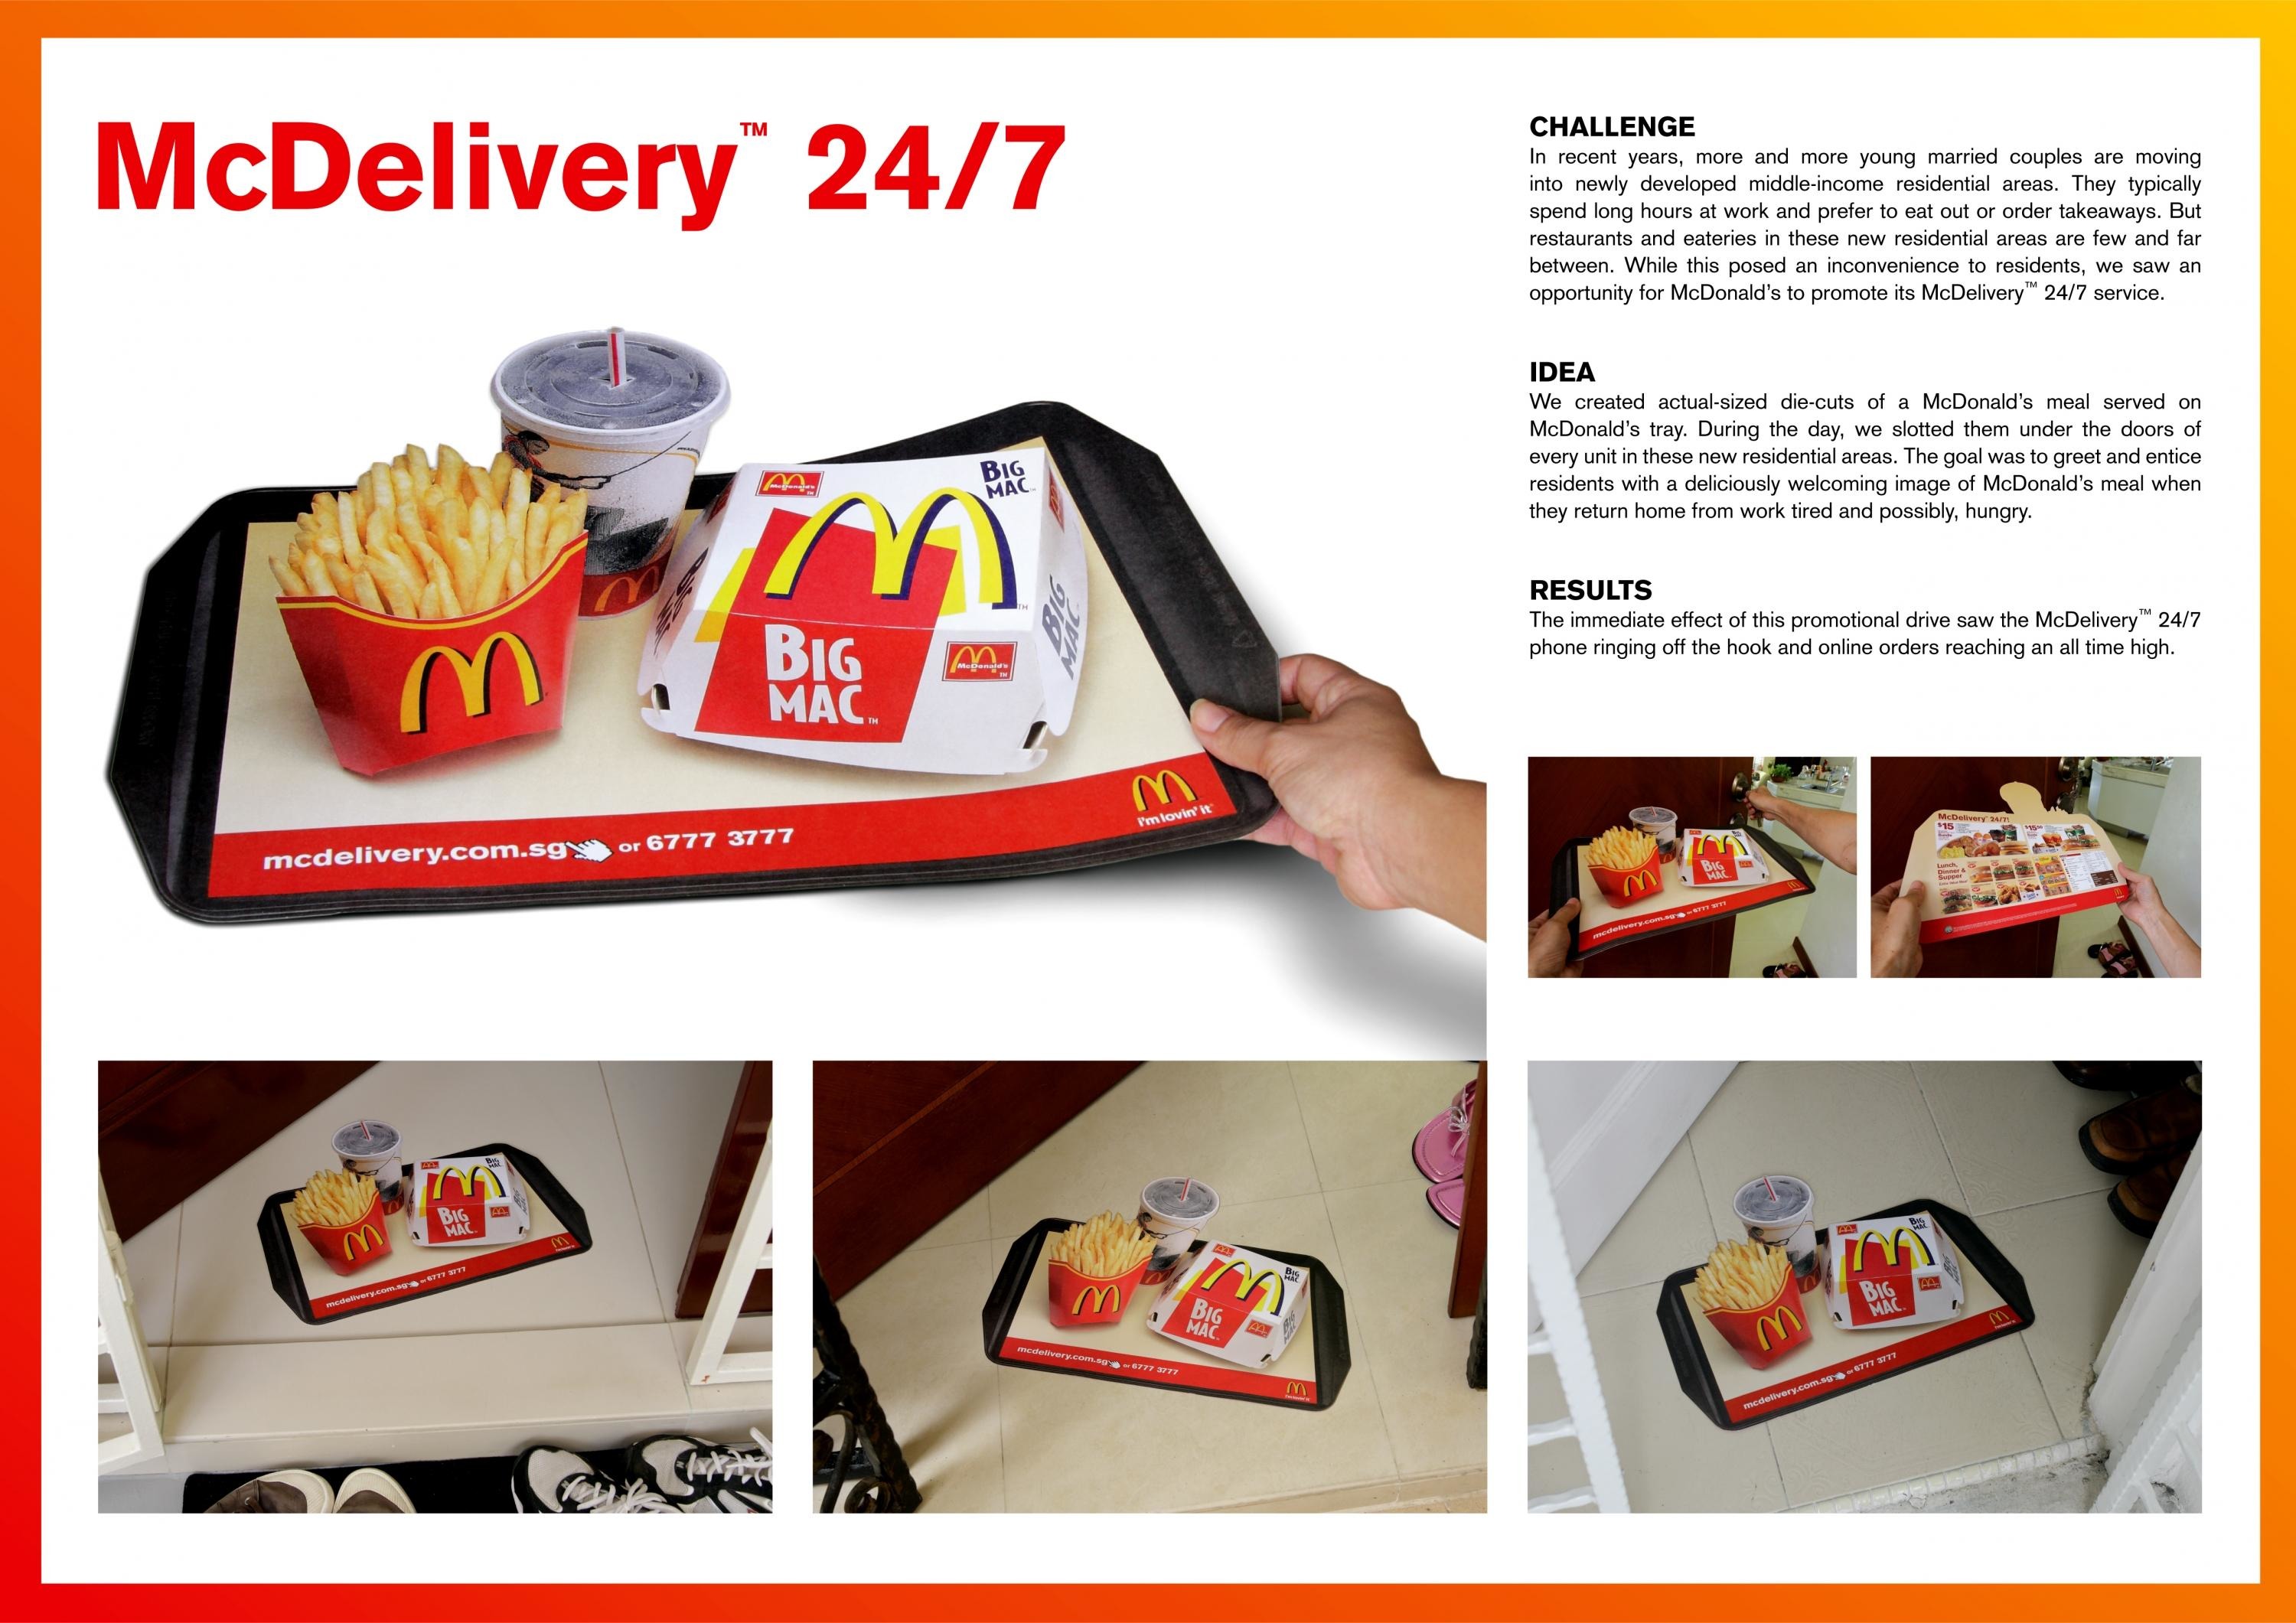 McDELIVERY